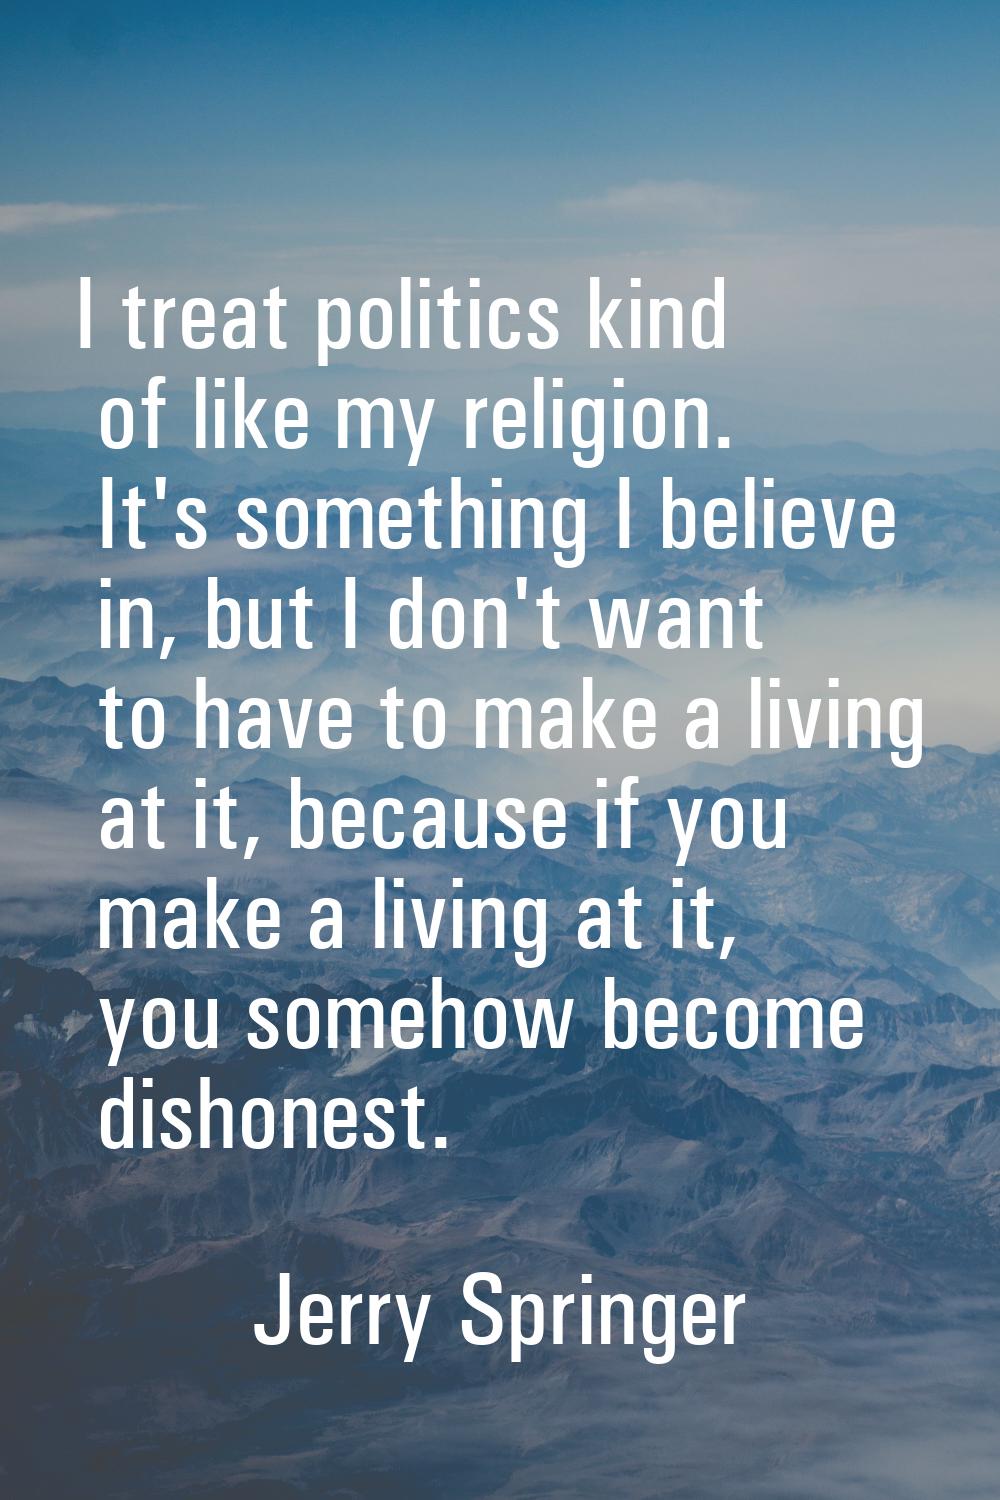 I treat politics kind of like my religion. It's something I believe in, but I don't want to have to